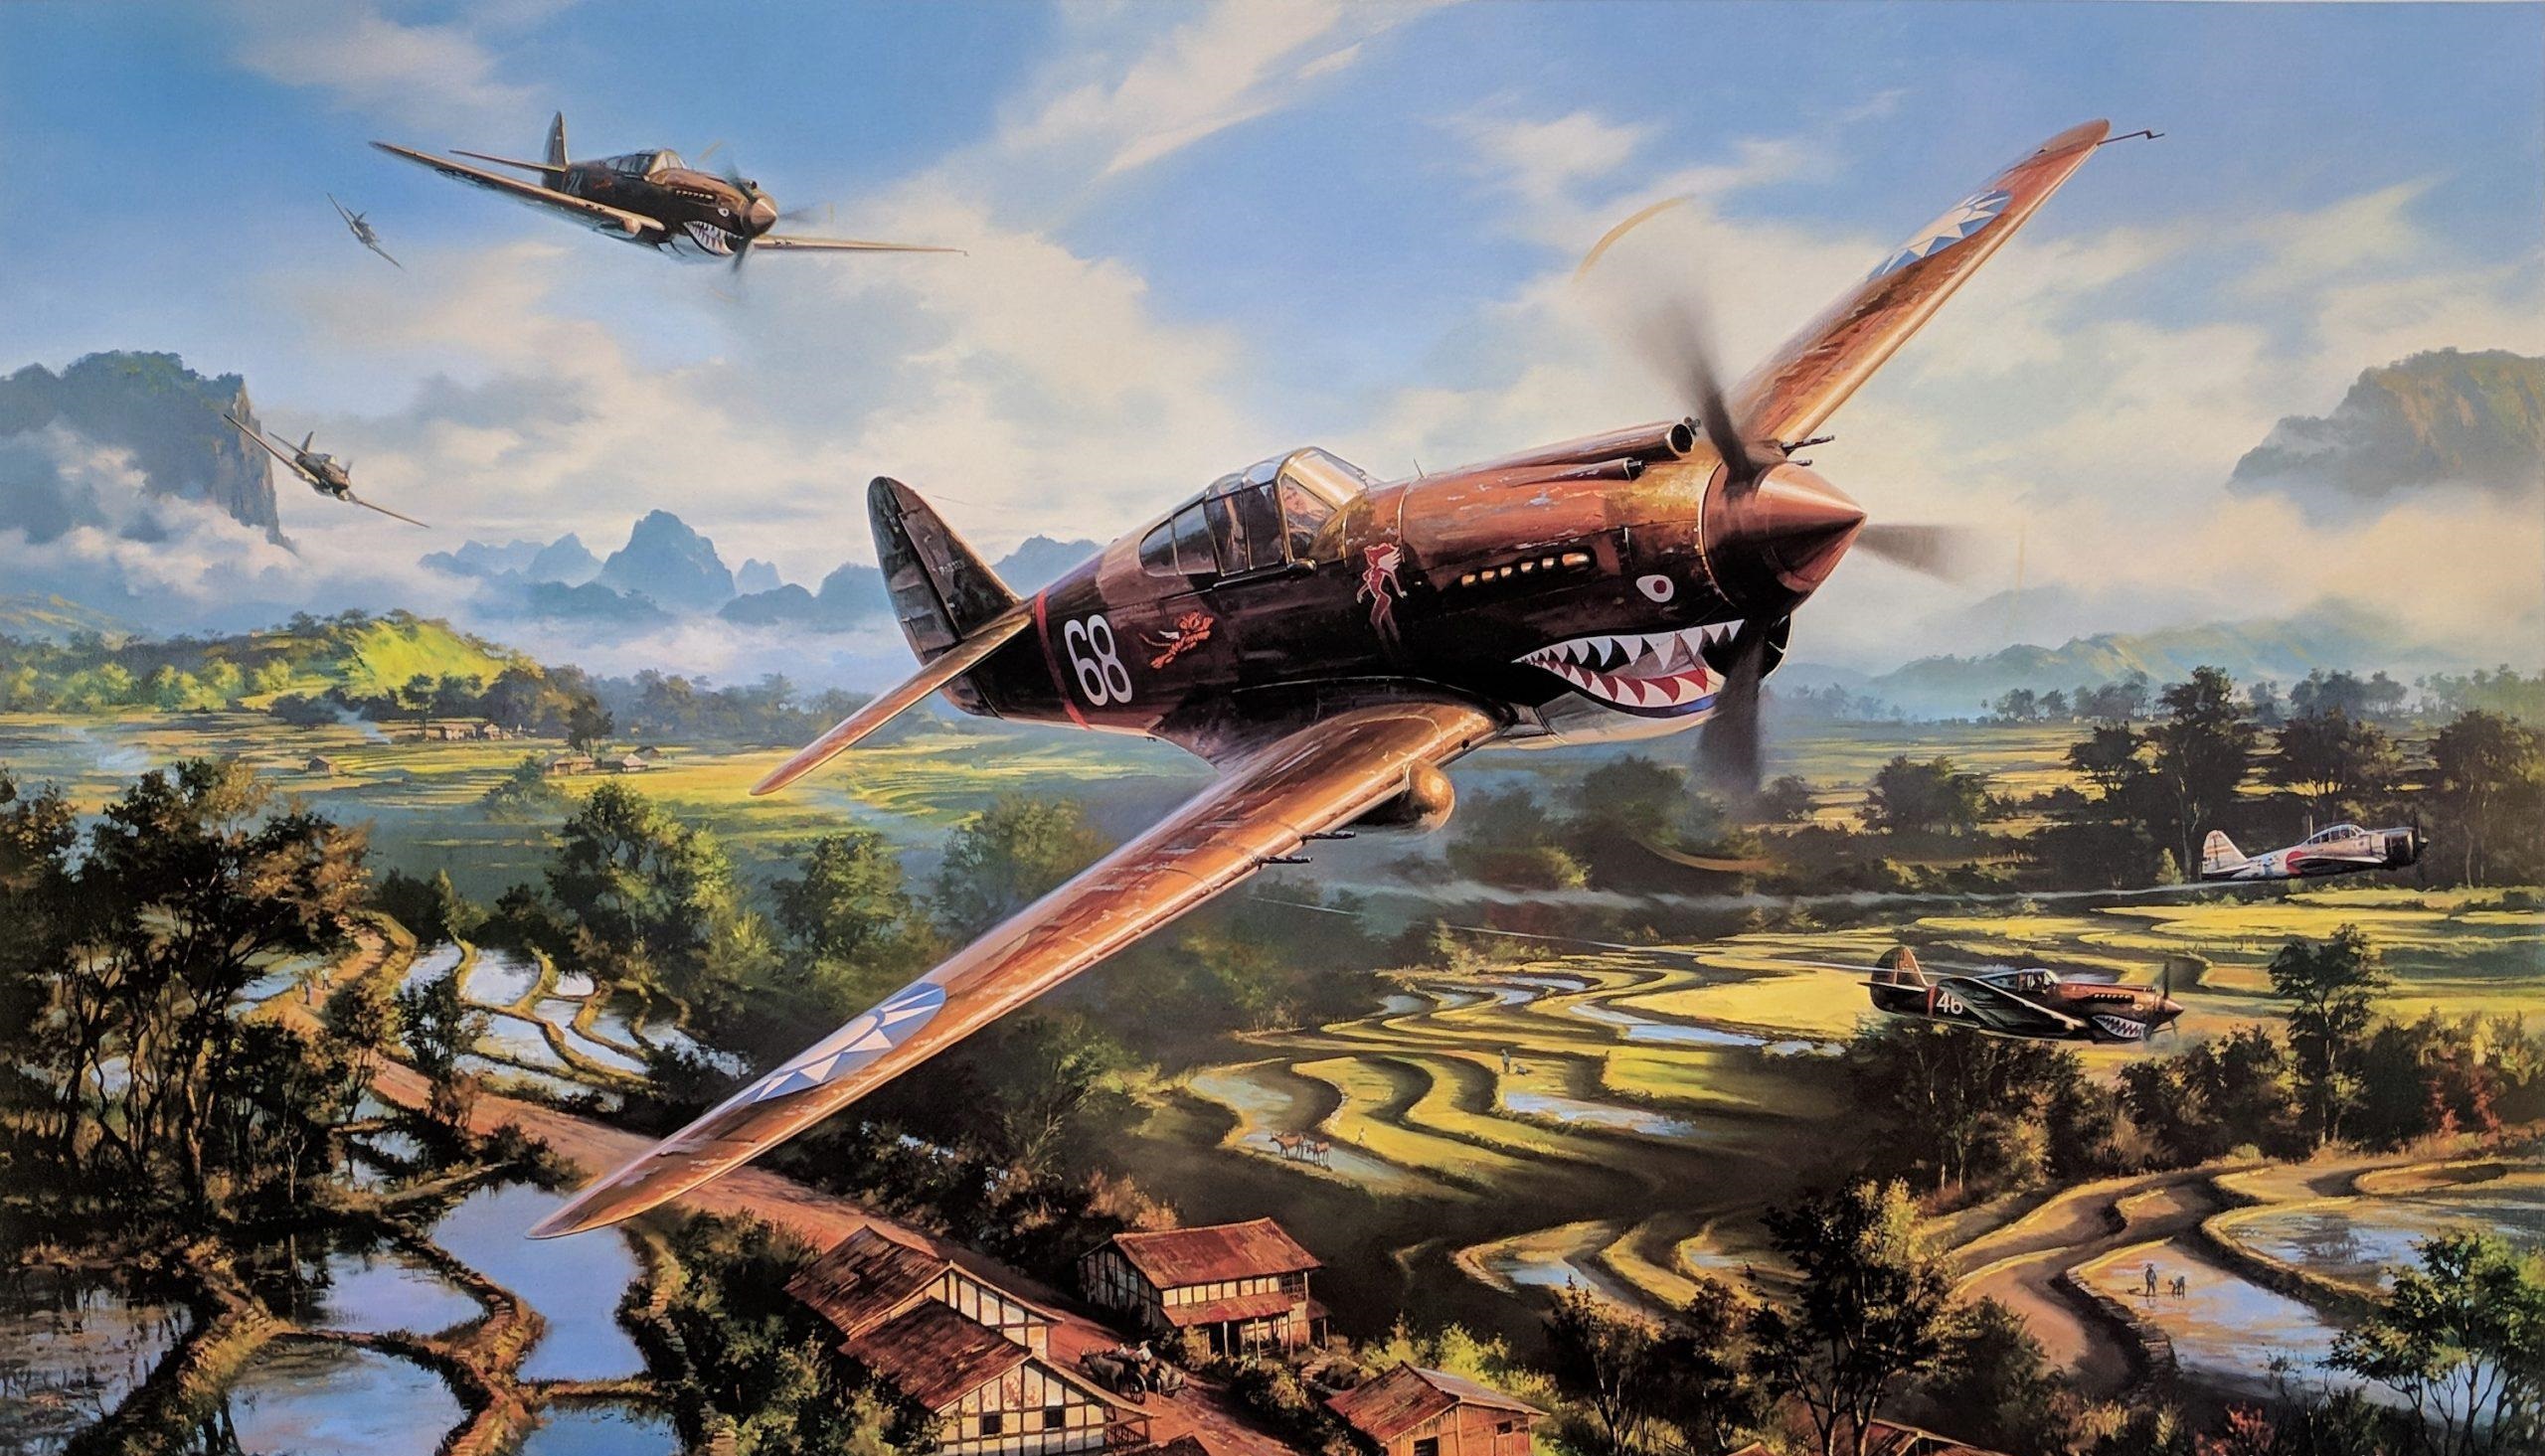 General 2560x1465 World War II war airplane aircraft Curtiss P-40 Warhawk American aircraft clouds flying military aircraft Flying Tiger sky landscape water trees